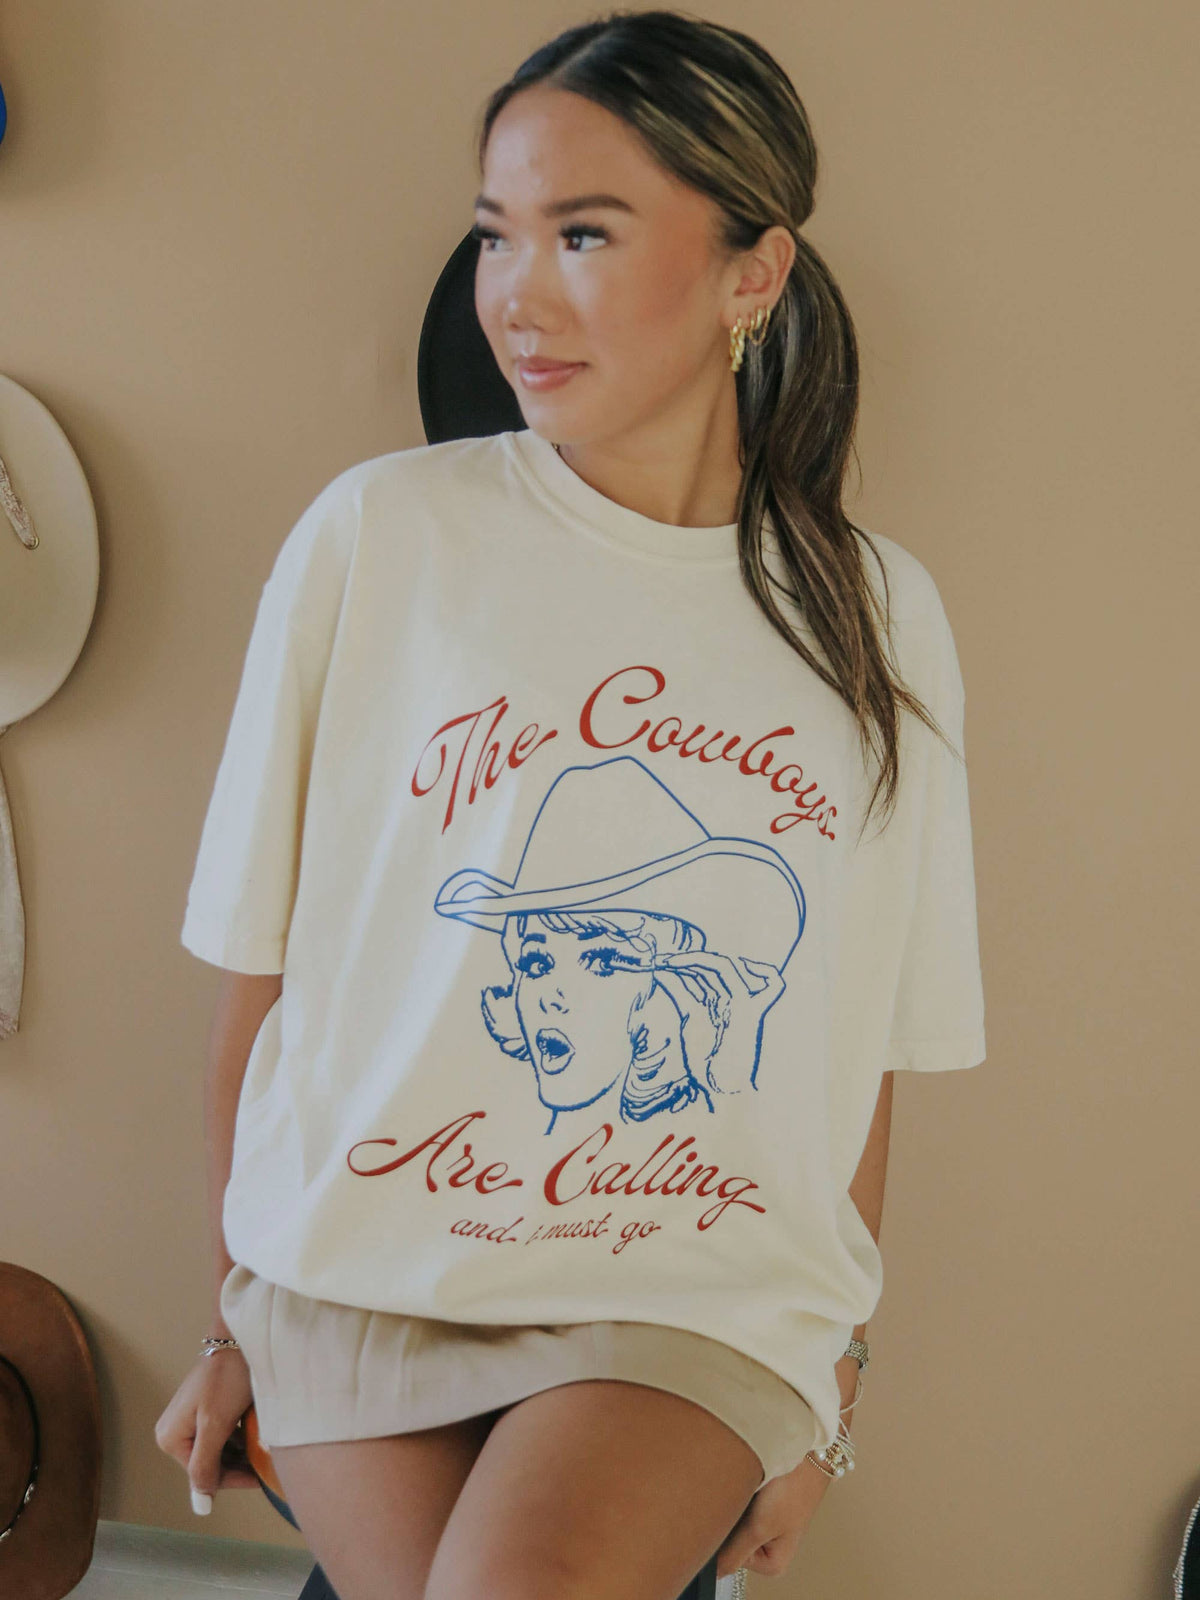 The Cowboys are Calling T-Shirt by Charlie Southern